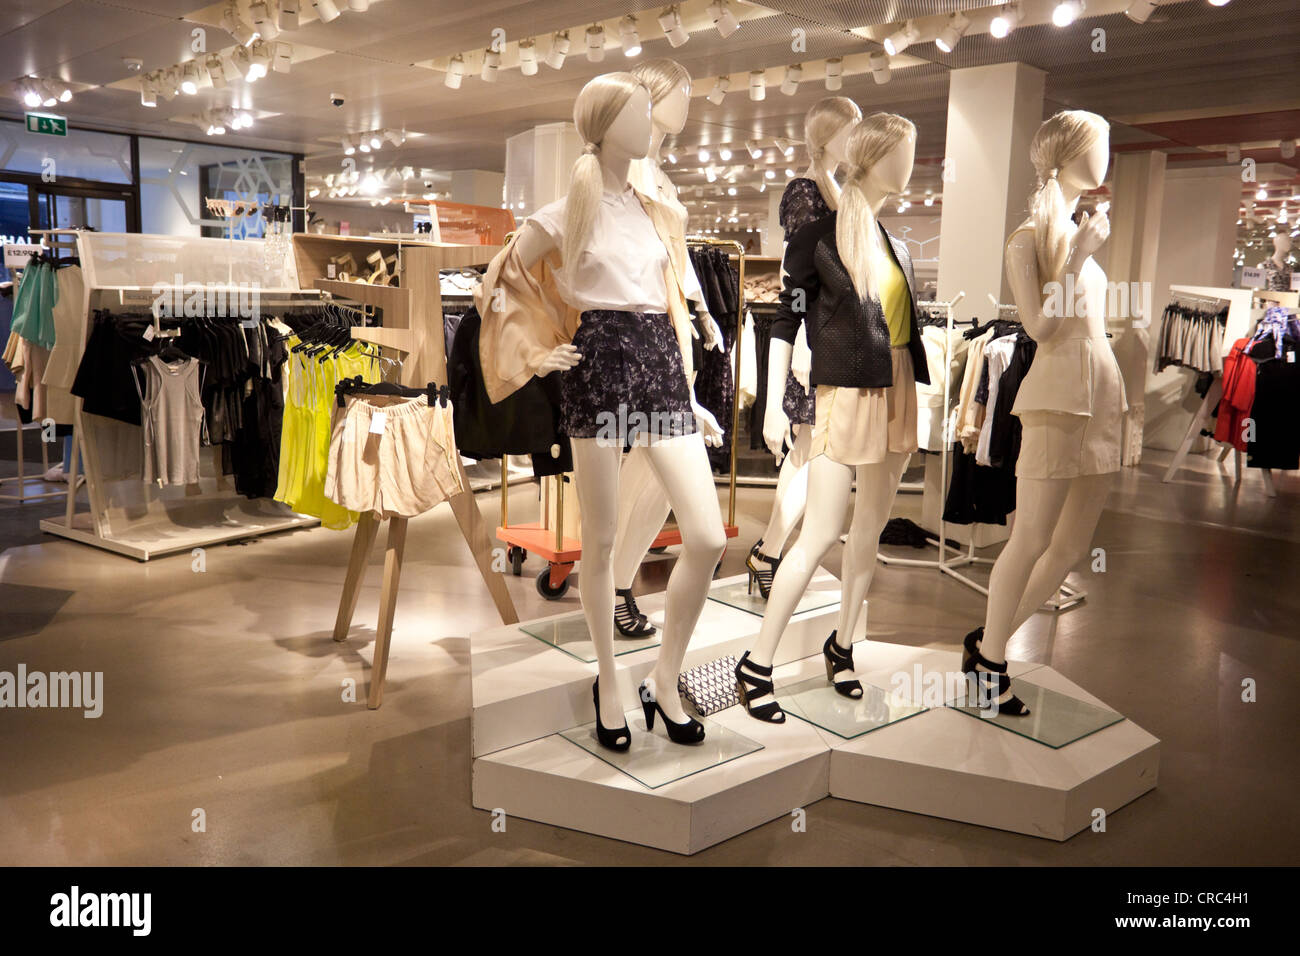 Female mannequins in a fashion shop, London, England, UK Stock Photo